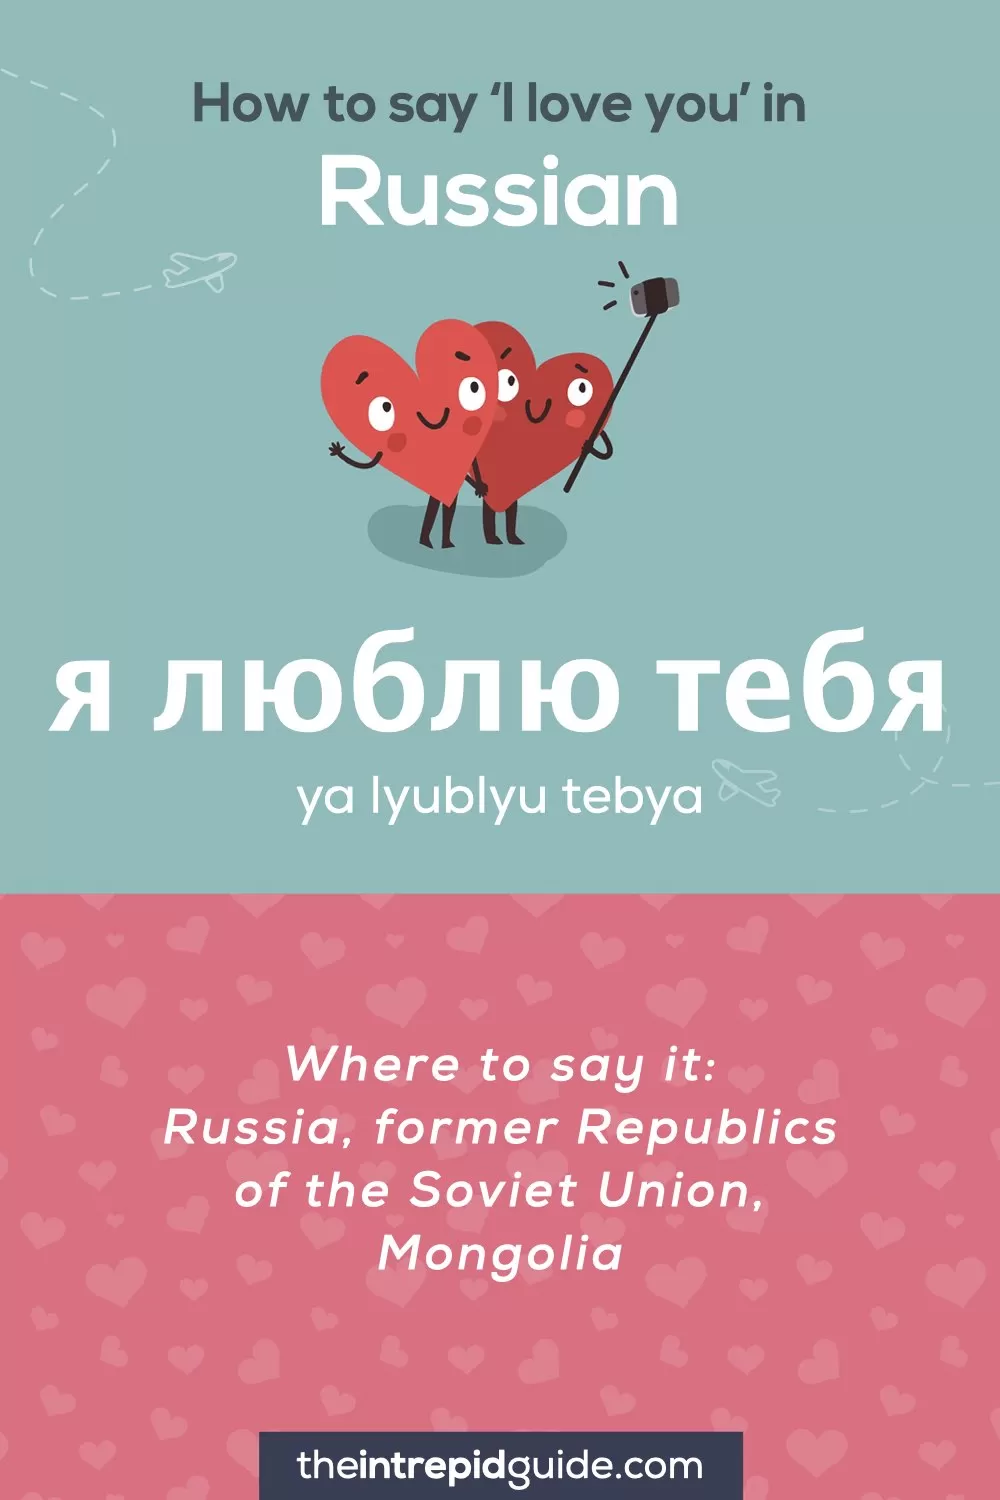 How to say I love you in different languages - Russian - я люблю тебя